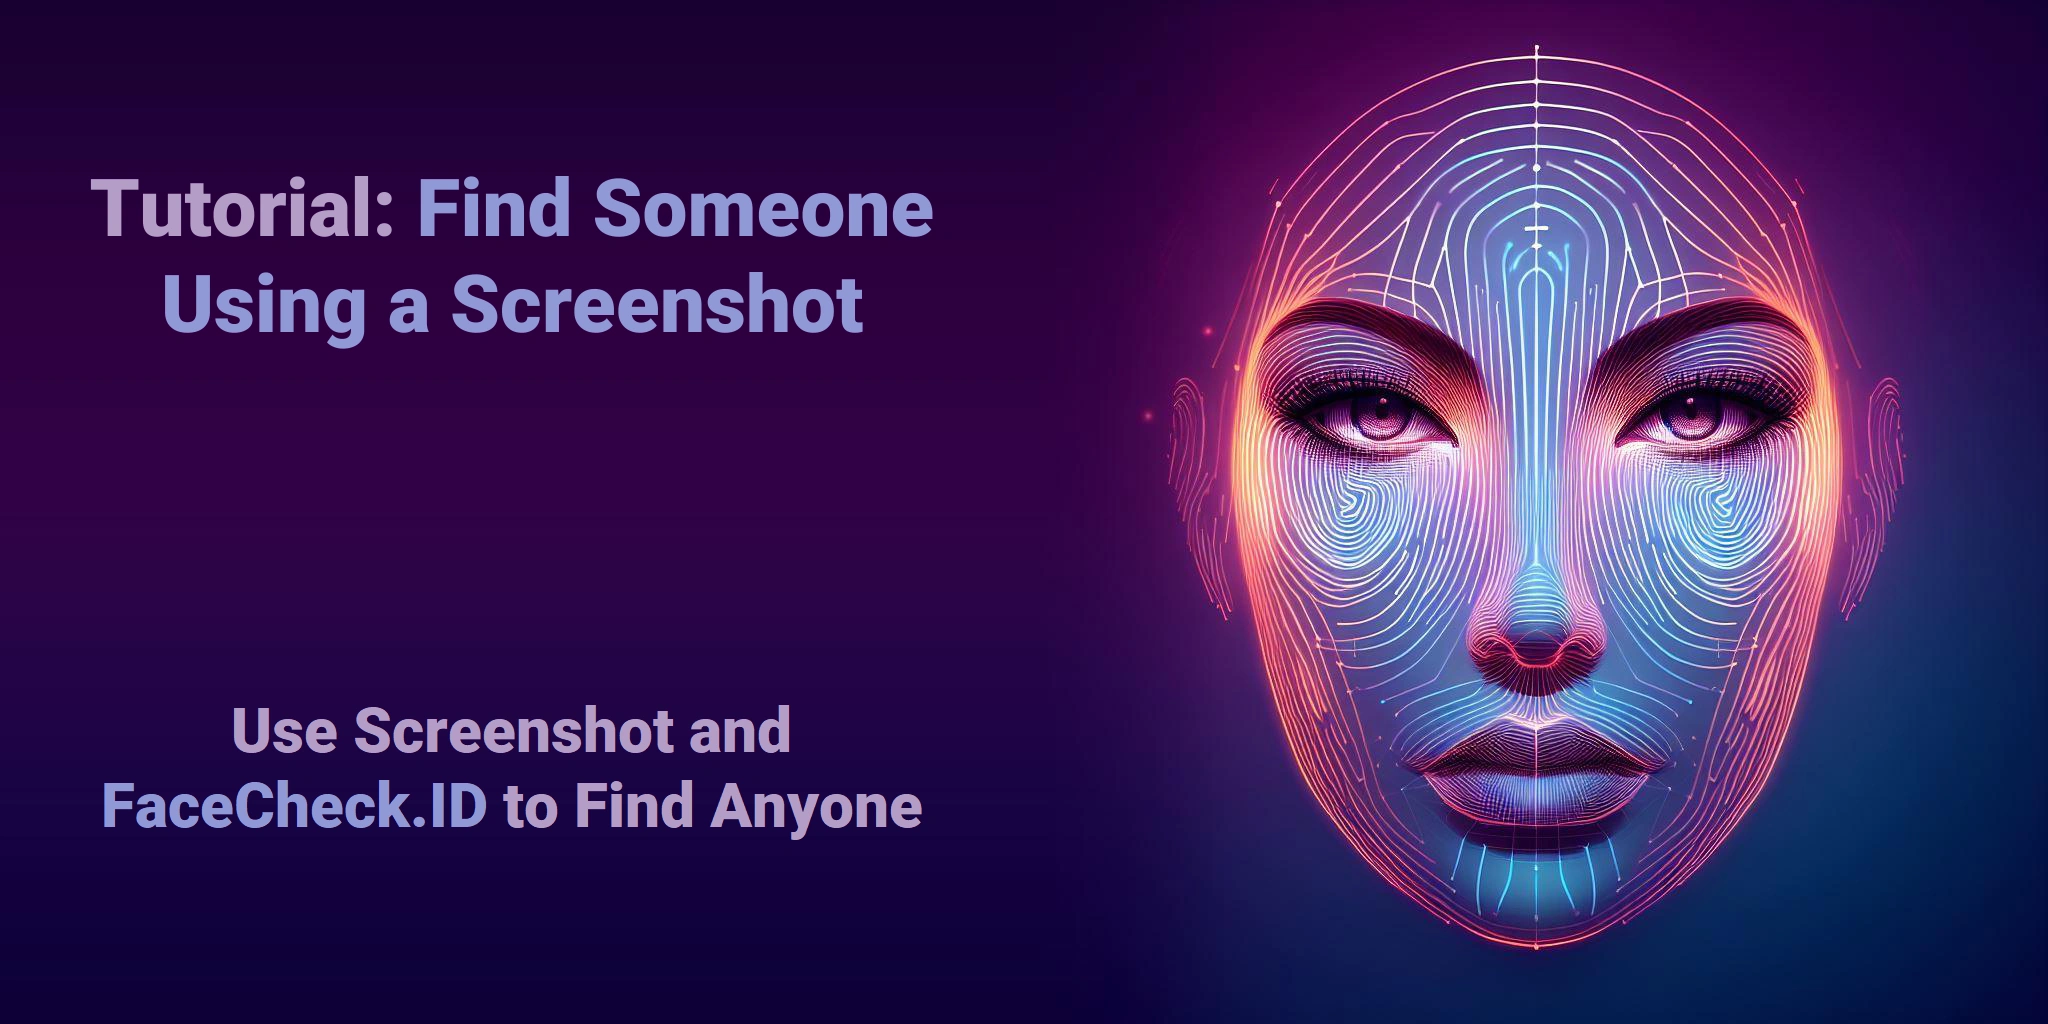 How to Find Someone Using a Screenshot